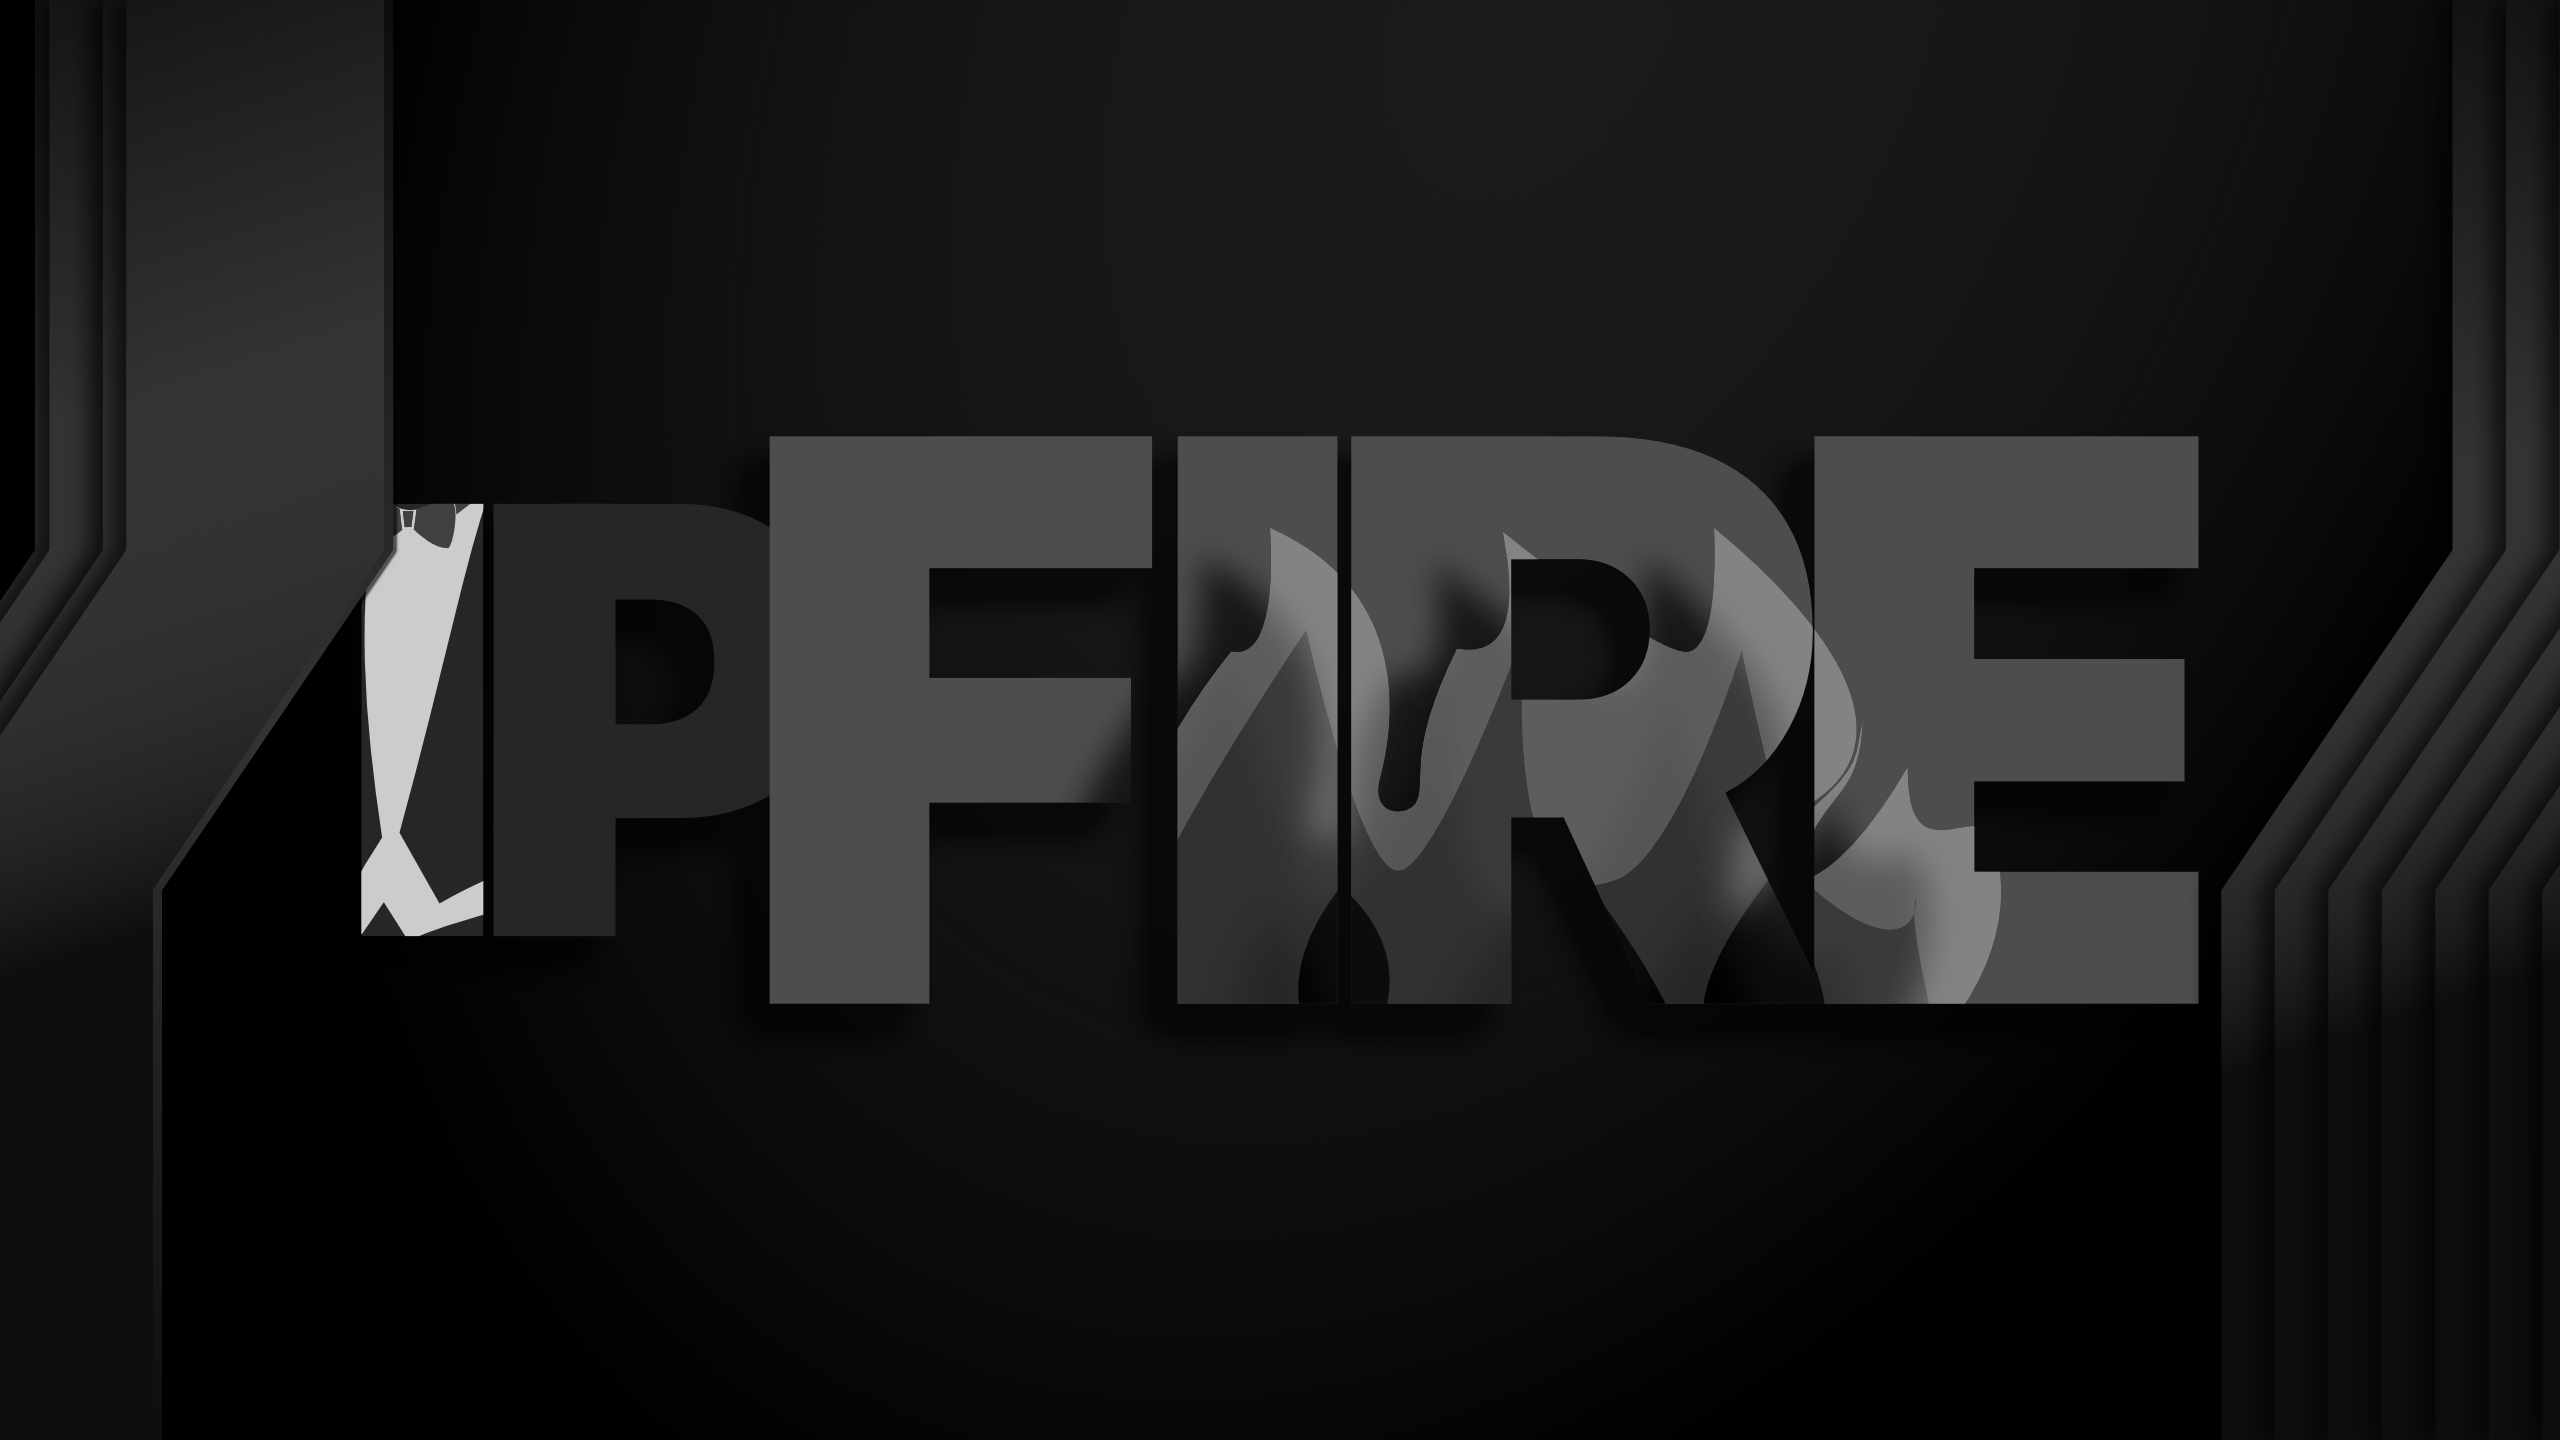 Up for grabs: IPFire’s logo